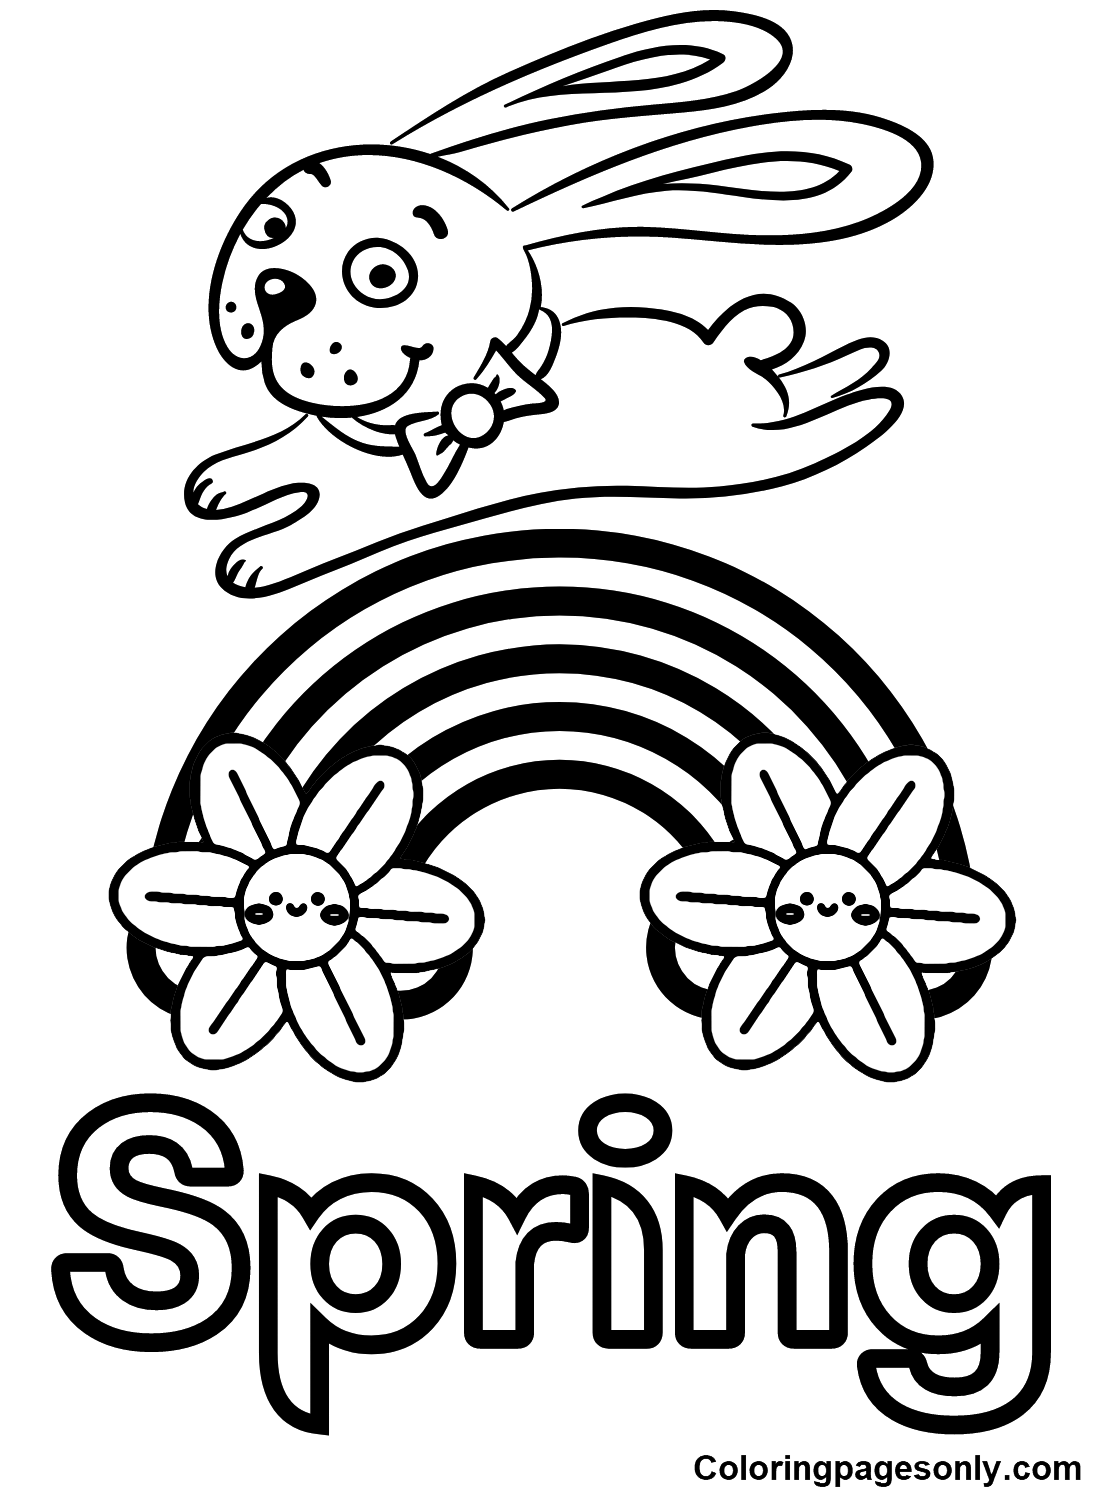 First Day of Spring with Bunny Coloring Pages